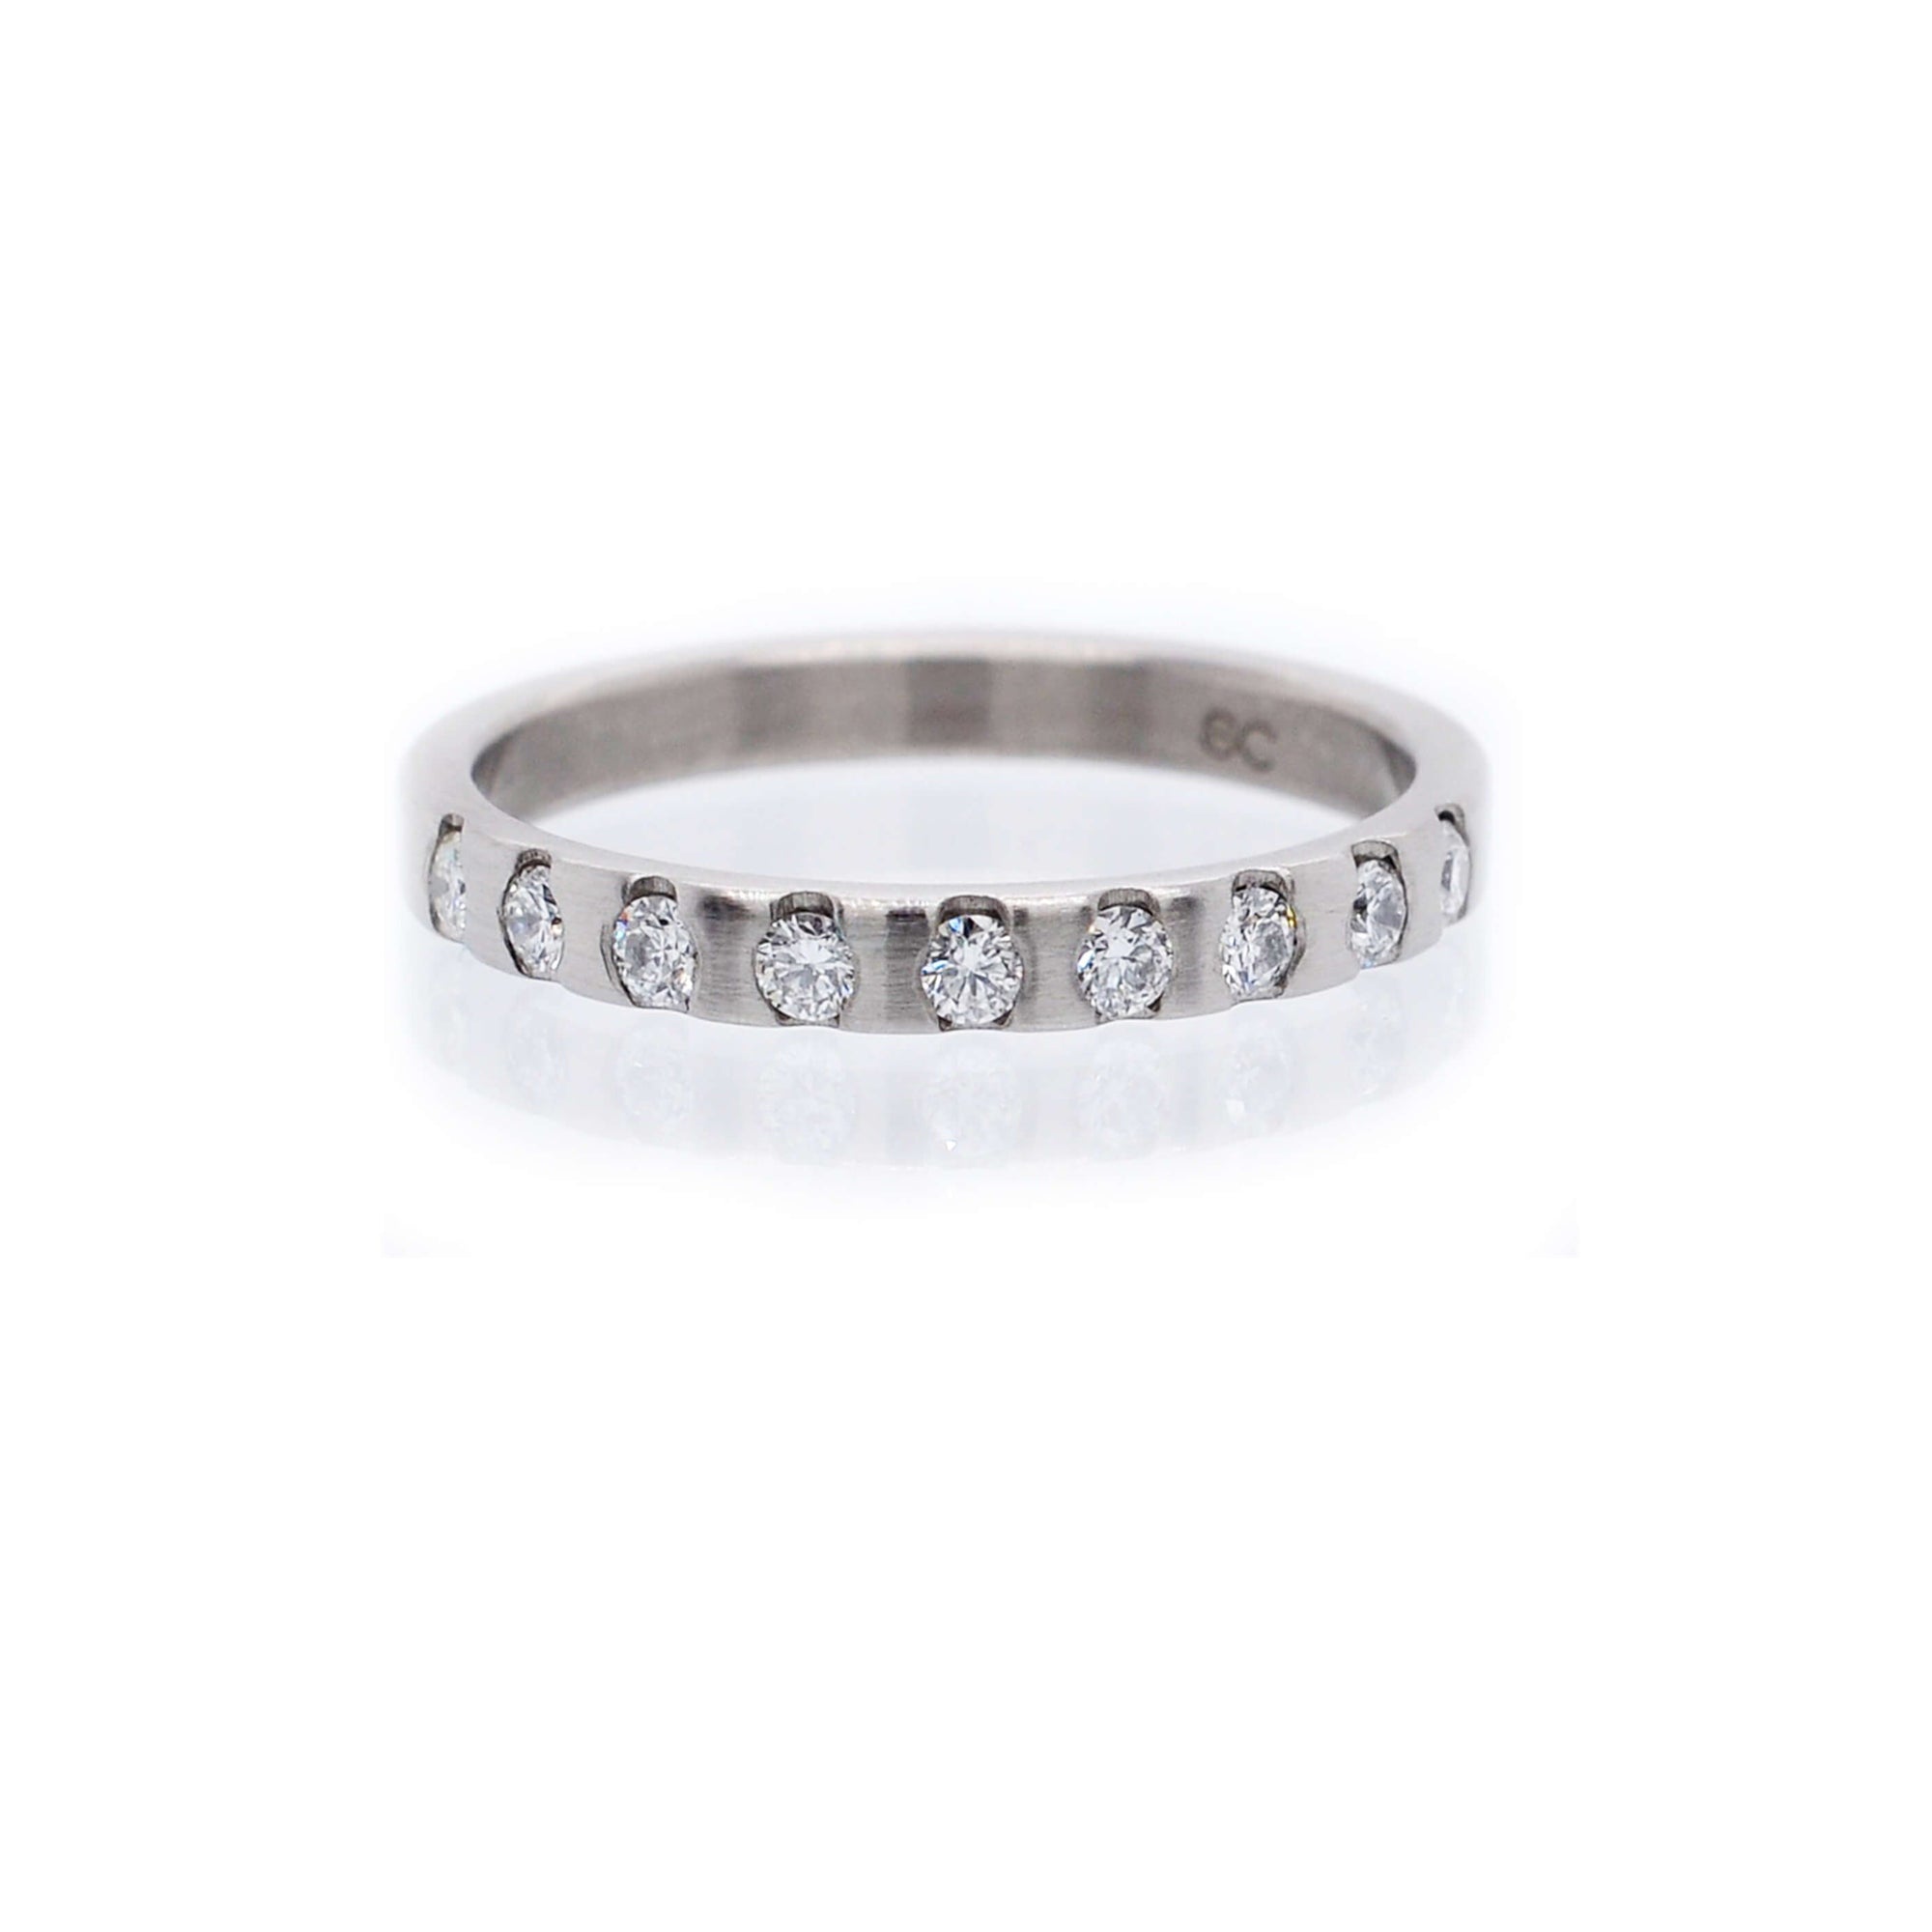 Diamond and palladium half eternity band made from recycled metal and conflict-free stones. Handmade by EC Design Jewelry in Minneapolis, MN.